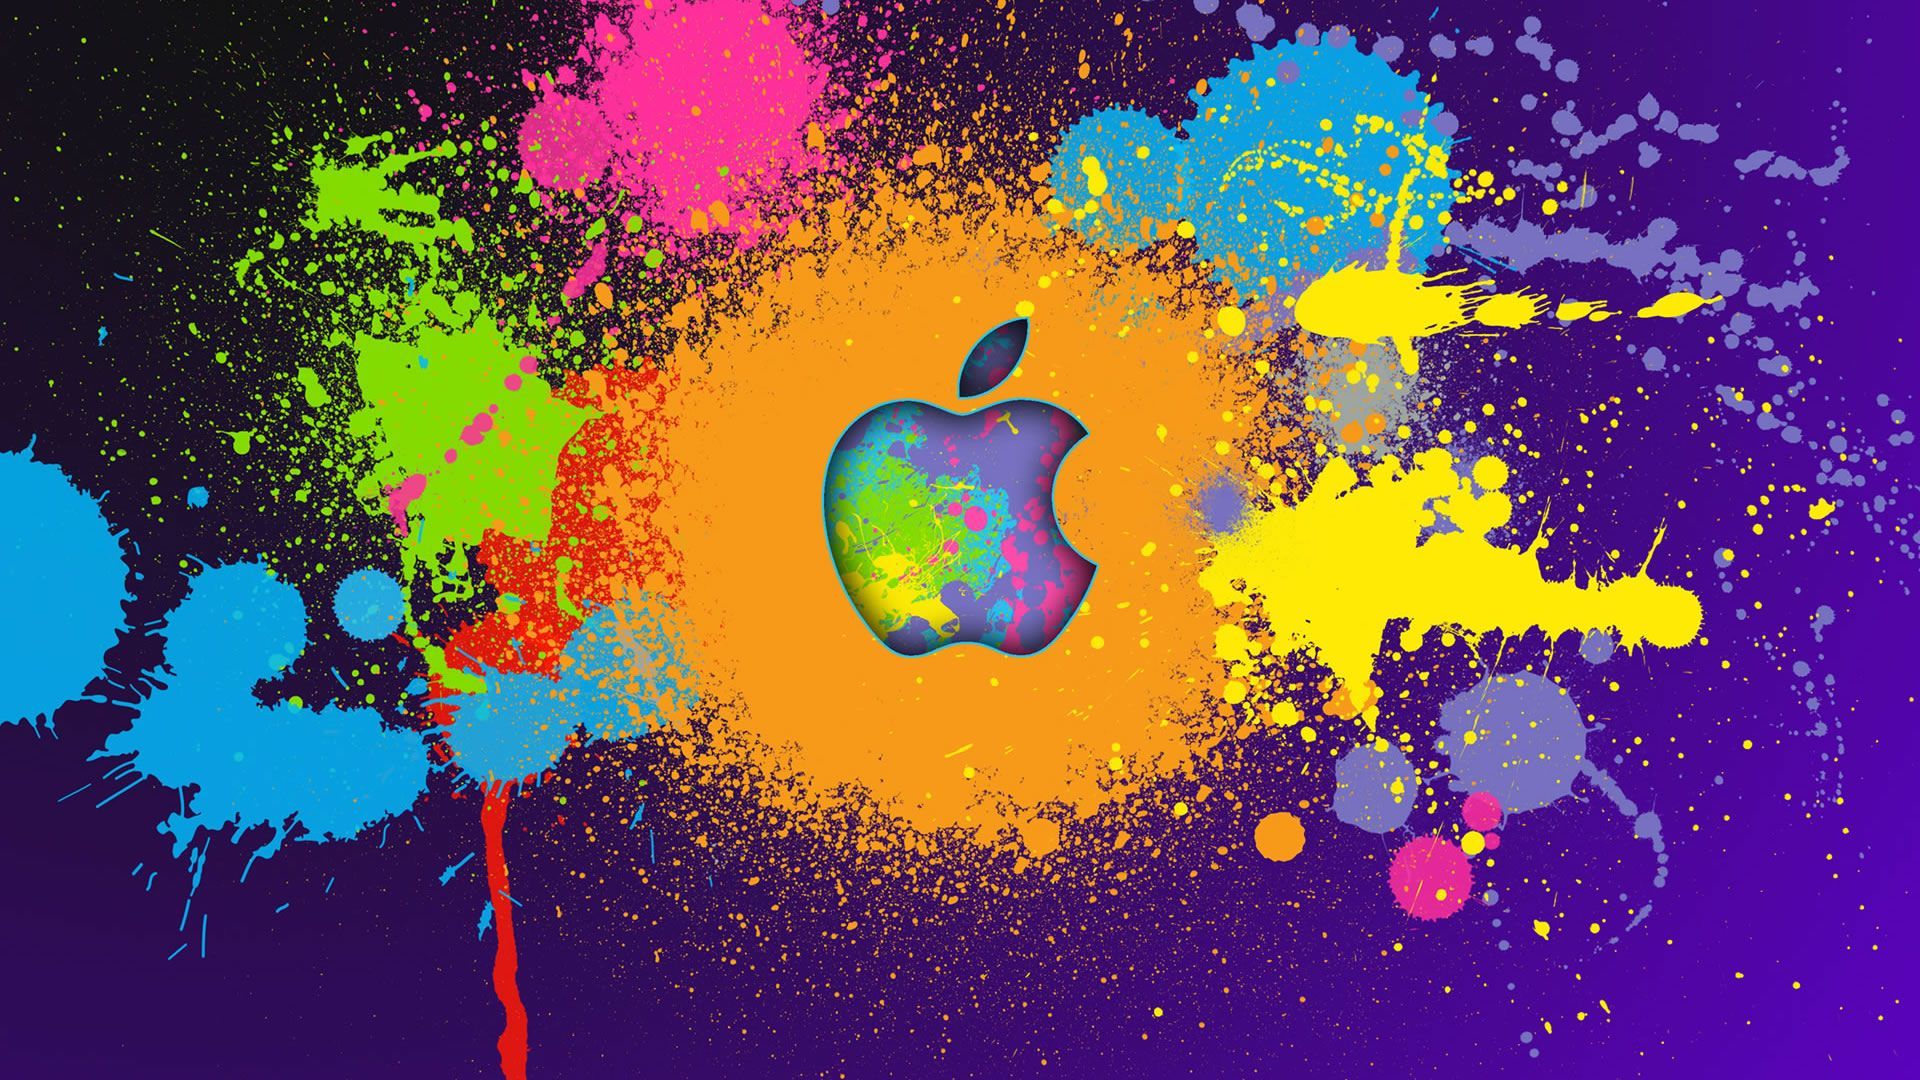 Apple Desktop Wallpapers HD Everything iDevice